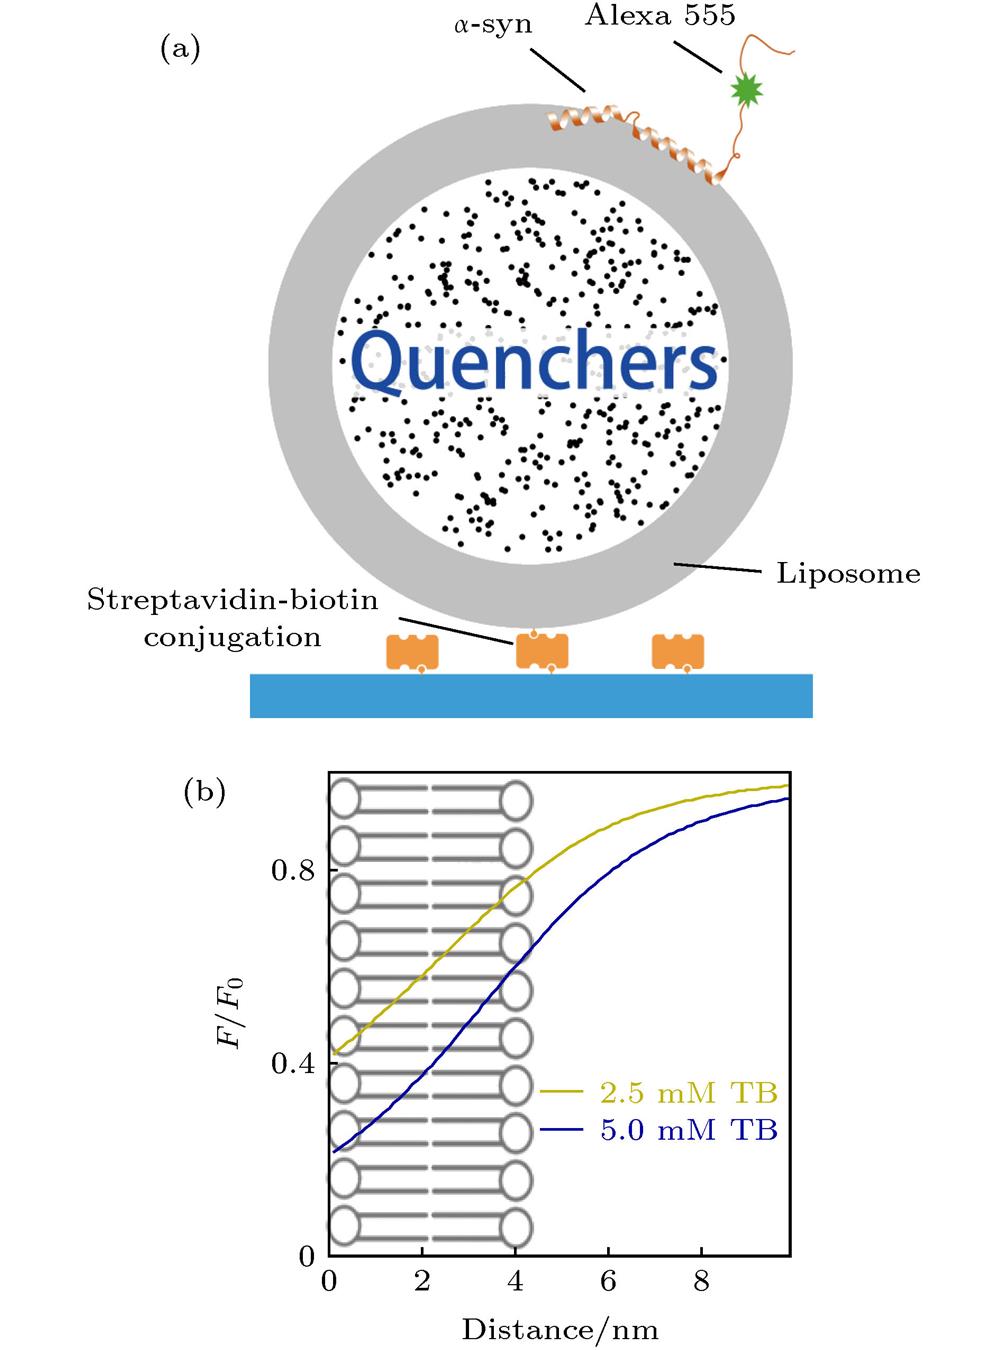 The LipoFRET method: (a) The schematic picture of LipoFRET experiment; (b) the relationship between distance from the inner surface of the liposome lipid bilayer and relative intensity F/F0. The quencher used here is trypan blue and the fluorophore is Alexa Fluor 555 (Alexa 555). The curves correspond to liposomes encapsulating 2.5 mM (above) and 5 mM (bottom) trypan blue.LipoFRET方法 (a) LipoFRET的实验体系示意图; (b) LipoFRET的距离-相对亮度曲线, 其中淬灭剂为台盼蓝, 所用的荧光分子为Alexa Fluor 555 (Alexa 555), 距离是指荧光基团到脂质体磷脂双层膜的内表面的距离, 曲线分别对应包封2.5 mM (上方曲线)及5 mM (下方曲线)台盼蓝的脂质体.